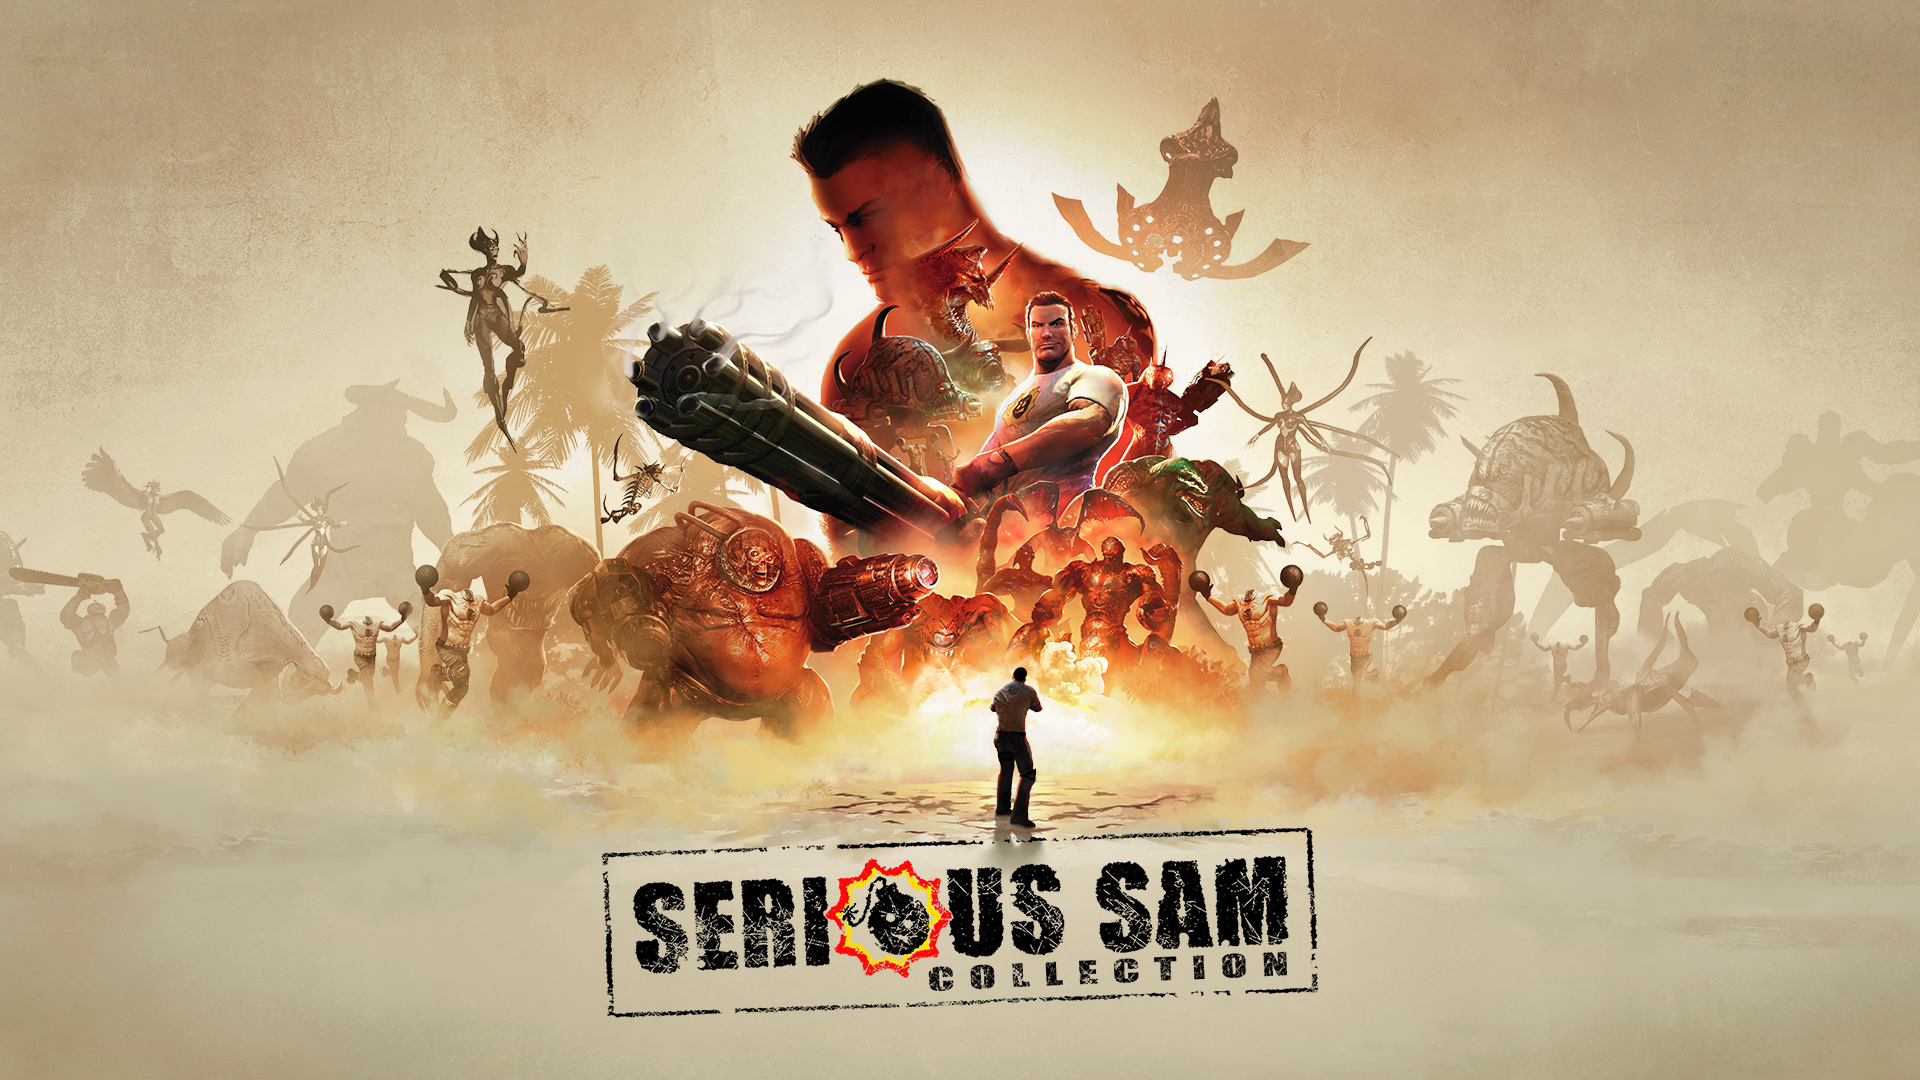 Serious Sam Collection now available on Nintendo Switch |